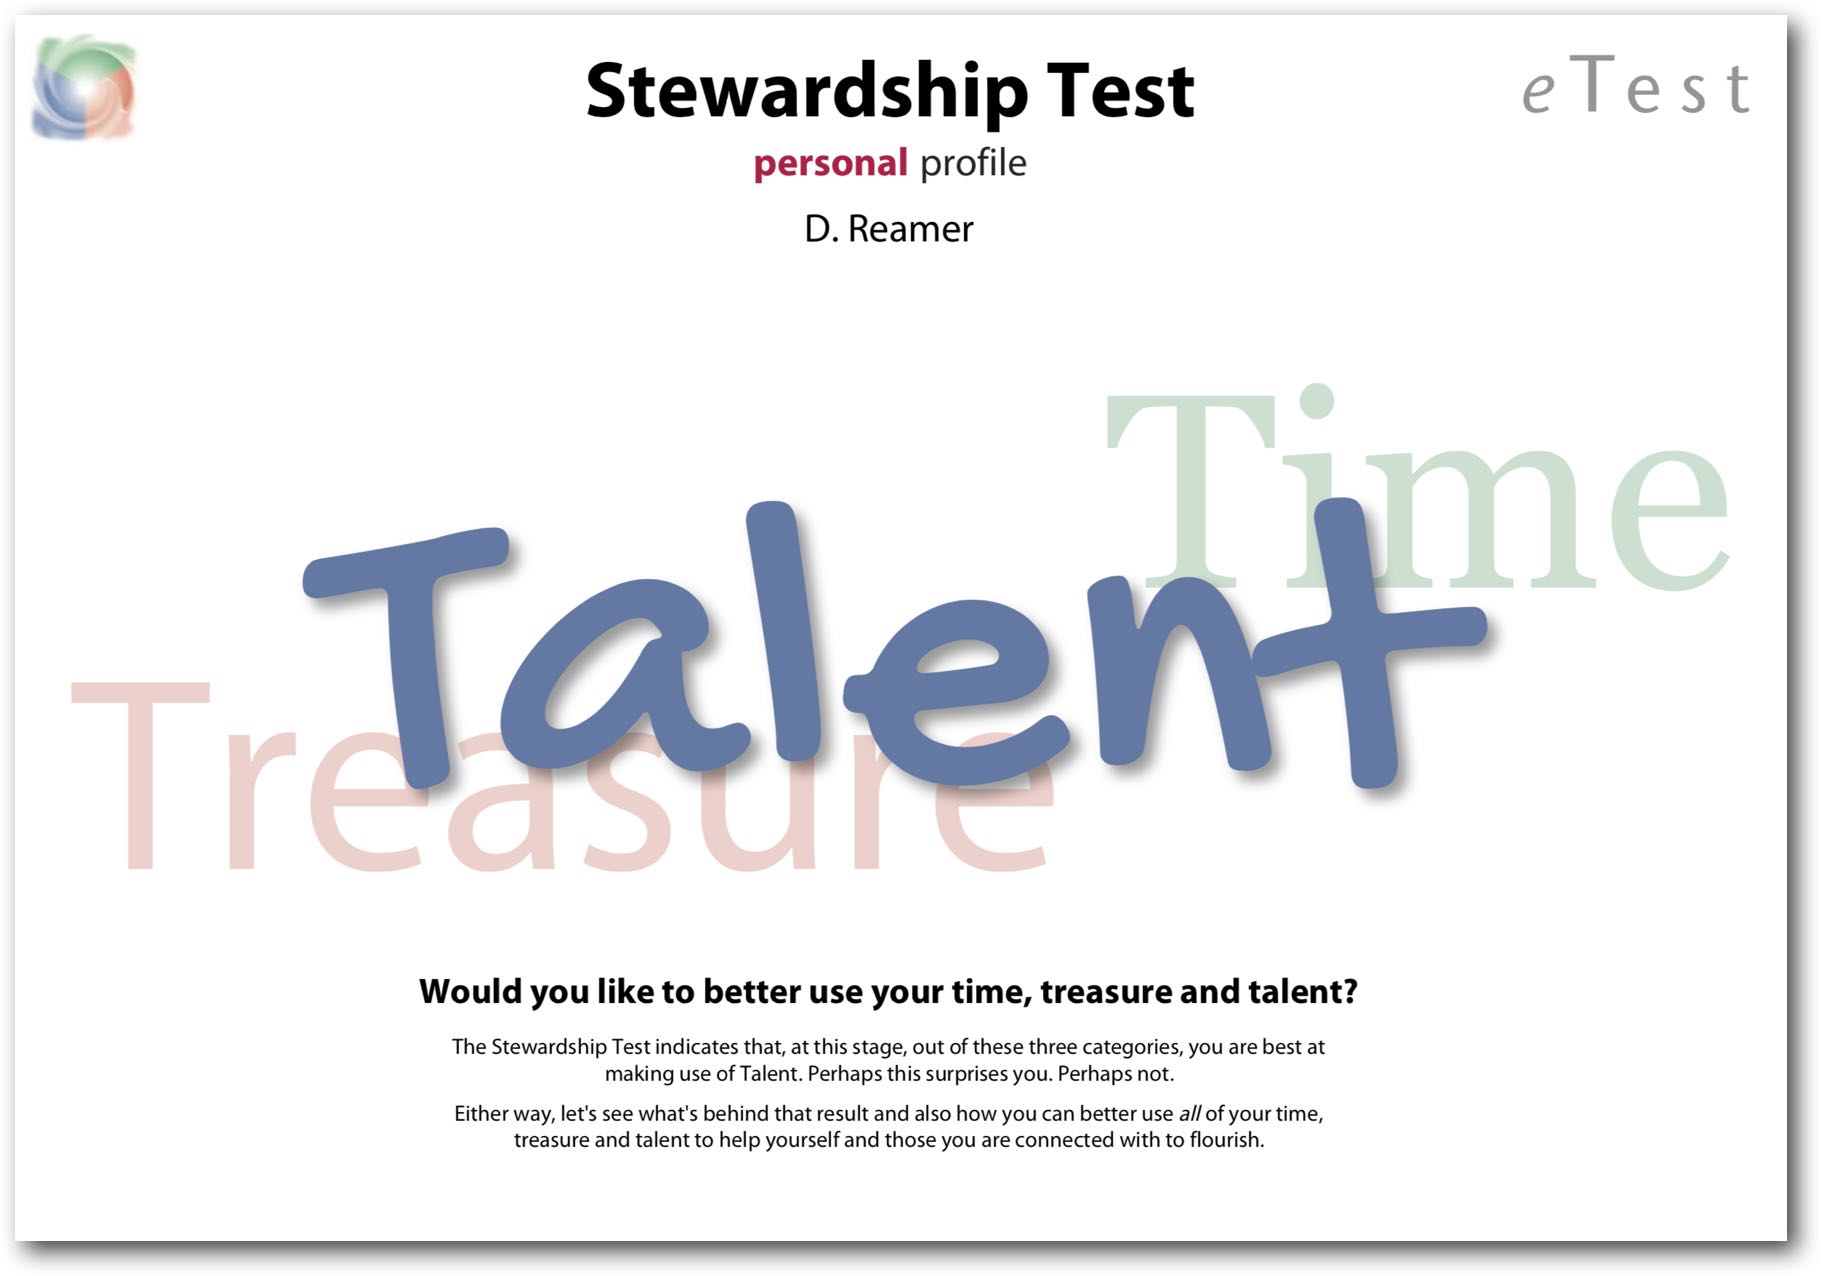 The Stewardship Test Personal Profile front page